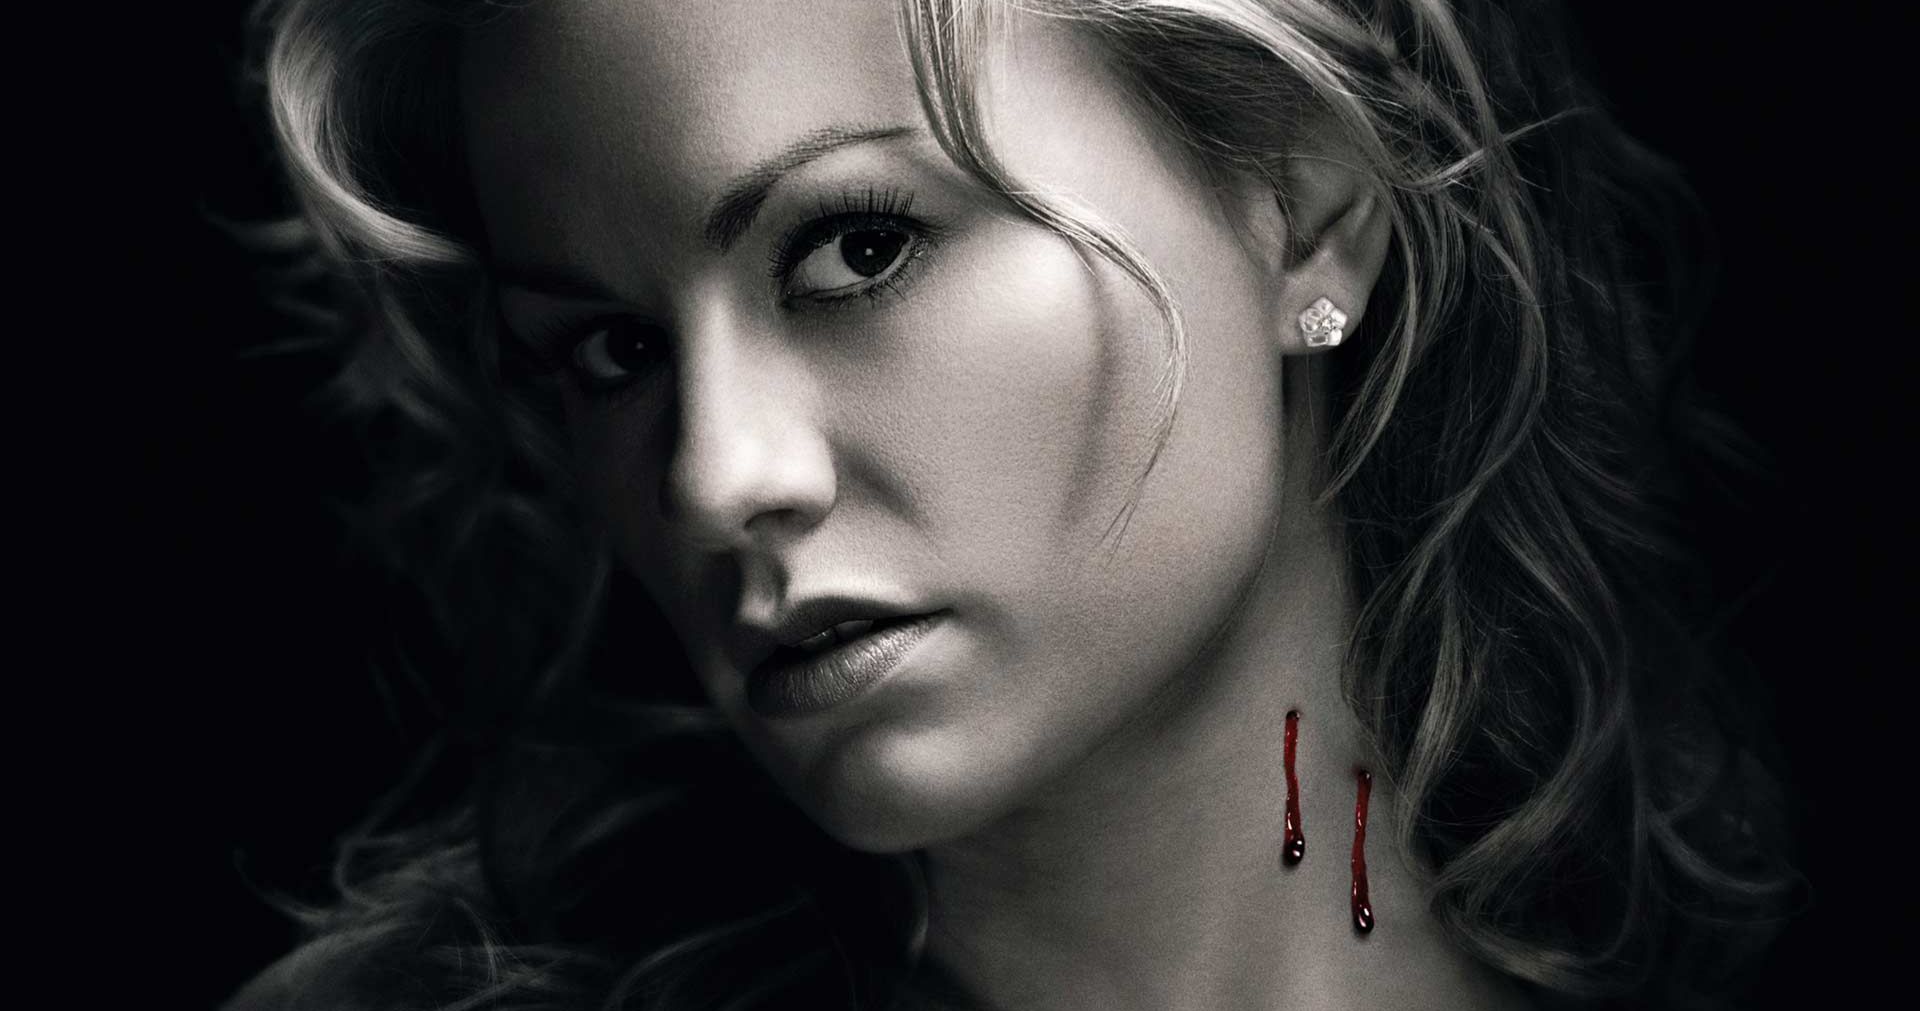 True Blood Reboot Rumors Are a Complete Surprise to Series Star Anna Paquin